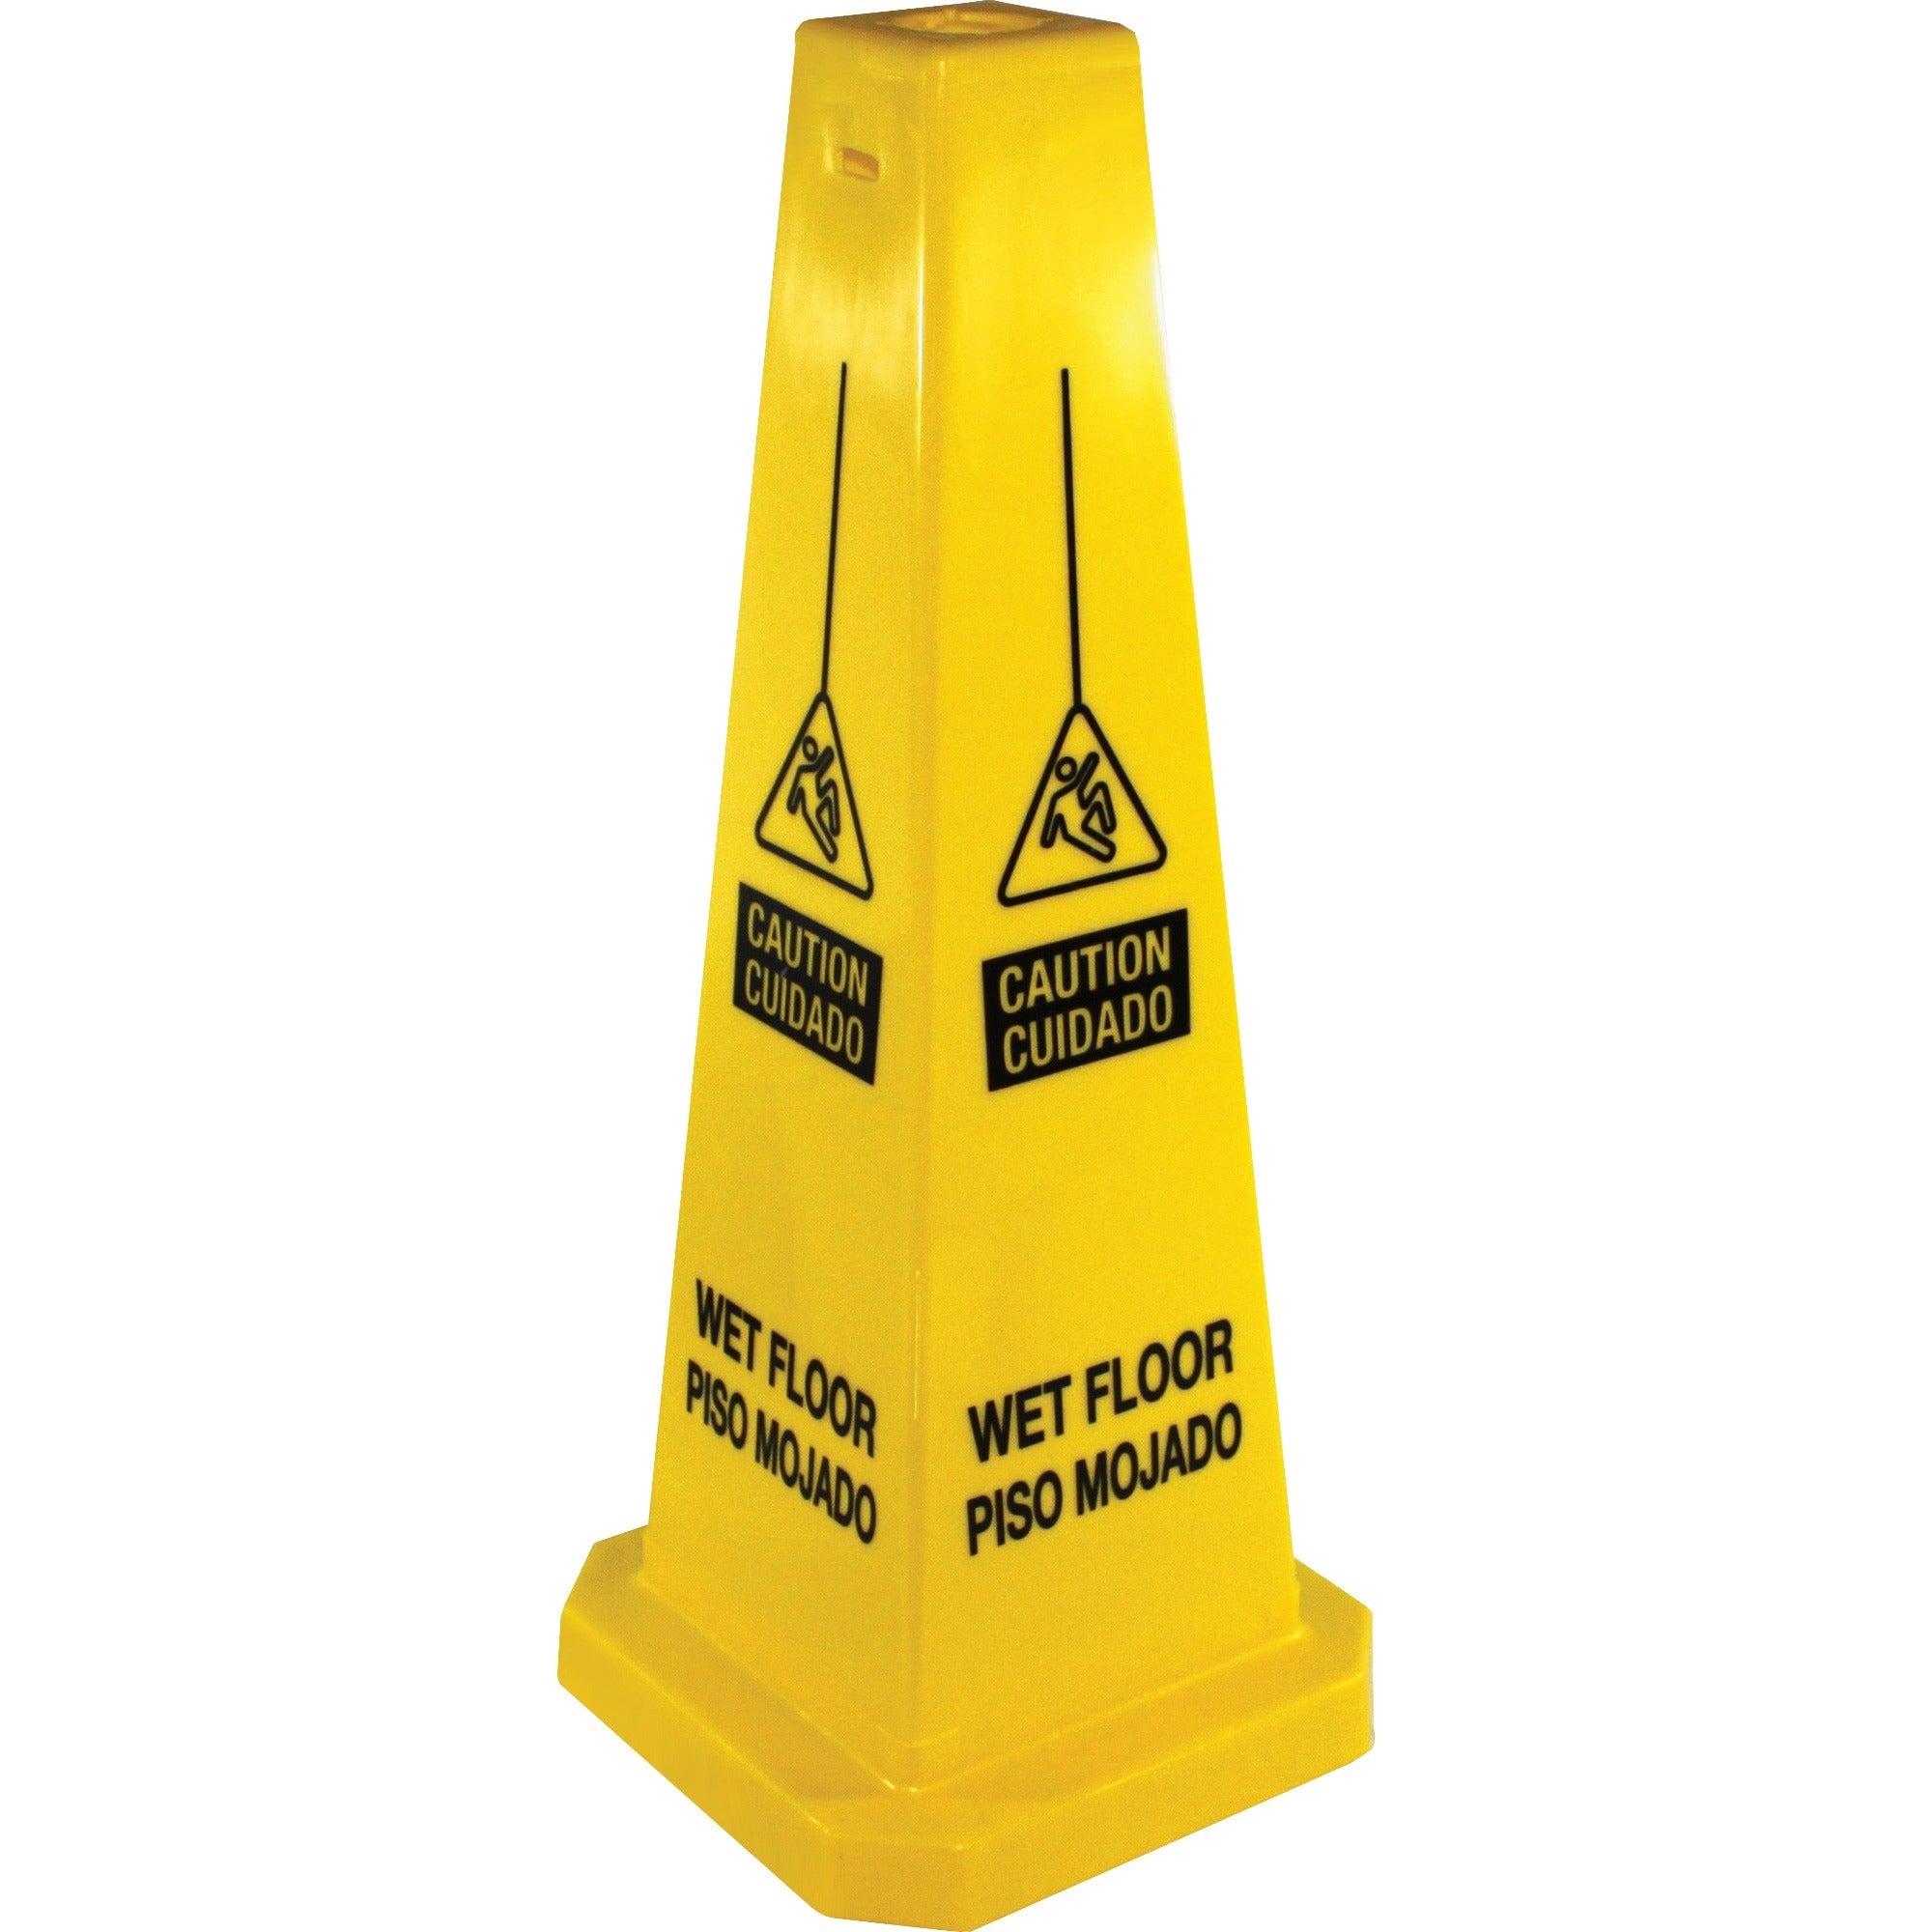 genuine-joe-bright-4-sided-caution-safety-cone-5-carton-english-spanish-10-width-x-24-height-x-10-depth-cone-shape-stackable-industrial-polypropylene-yellow_gjo58880ct - 2